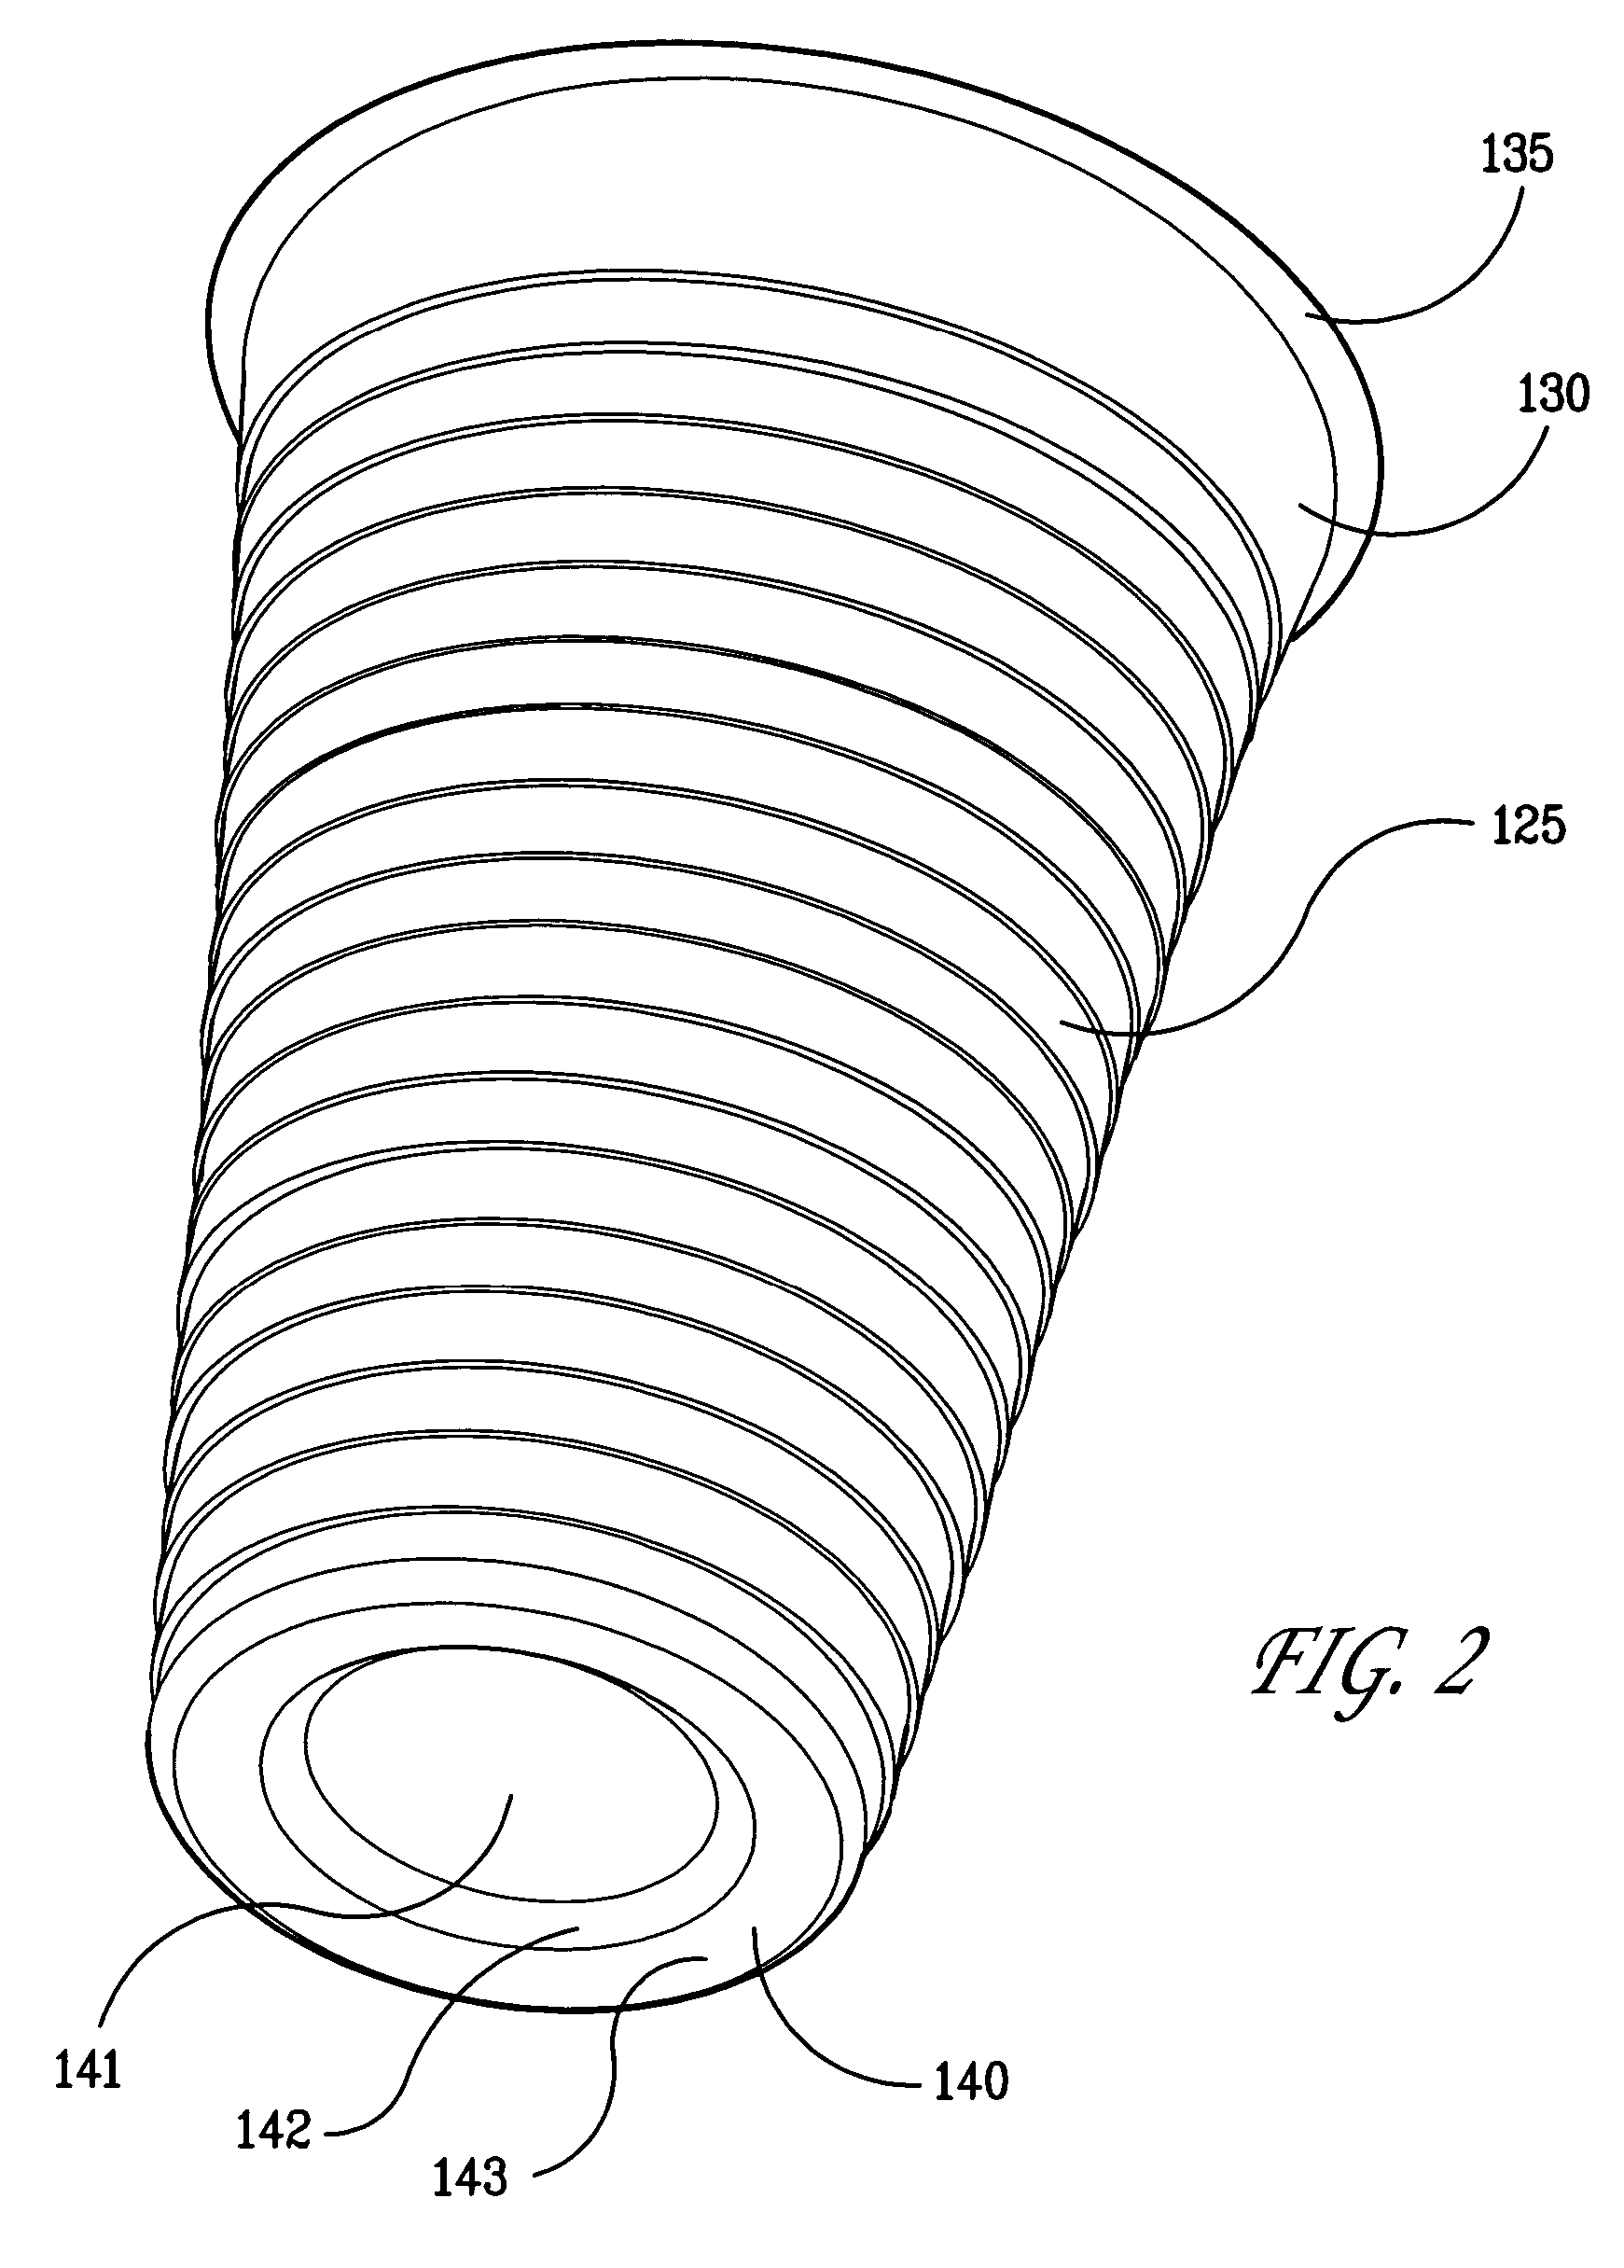 Paper-wrapped polymer beverage container